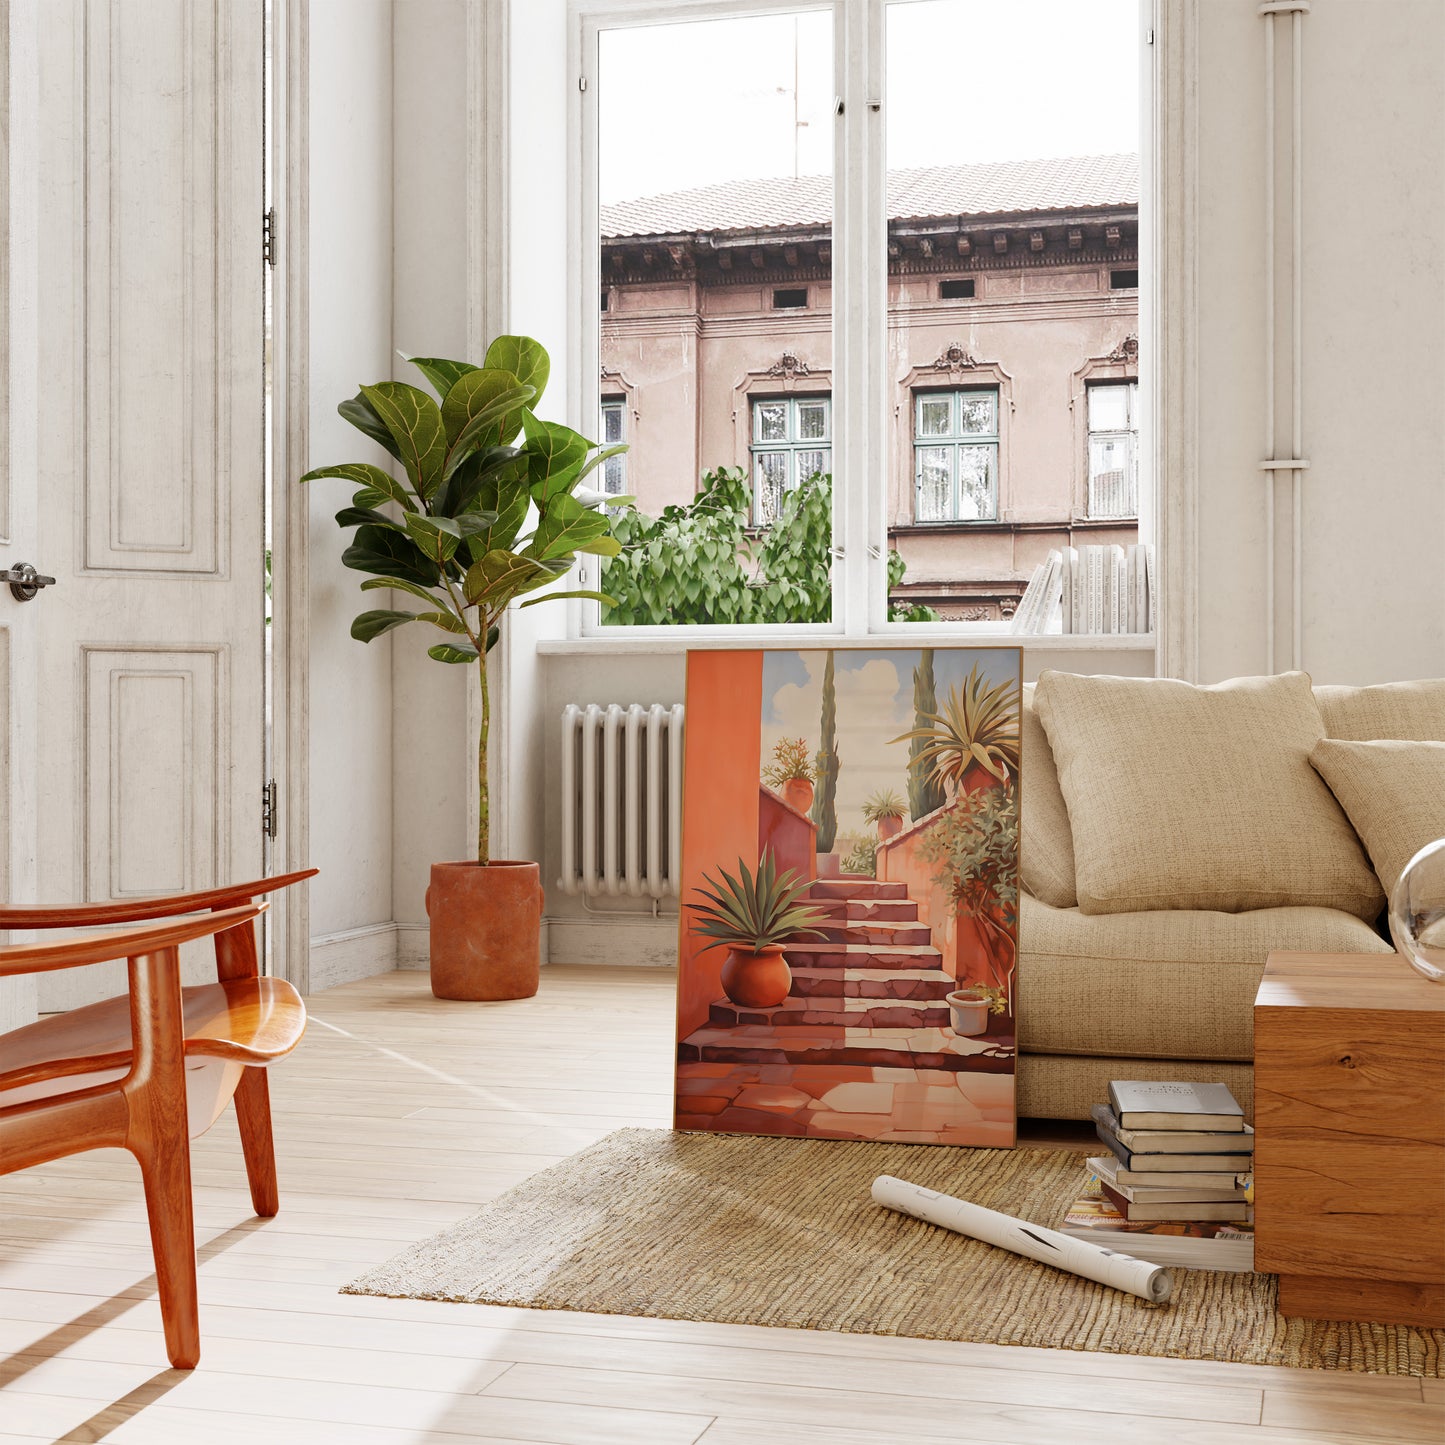 A cozy living room with a sofa, plants, and an open window with a city view.